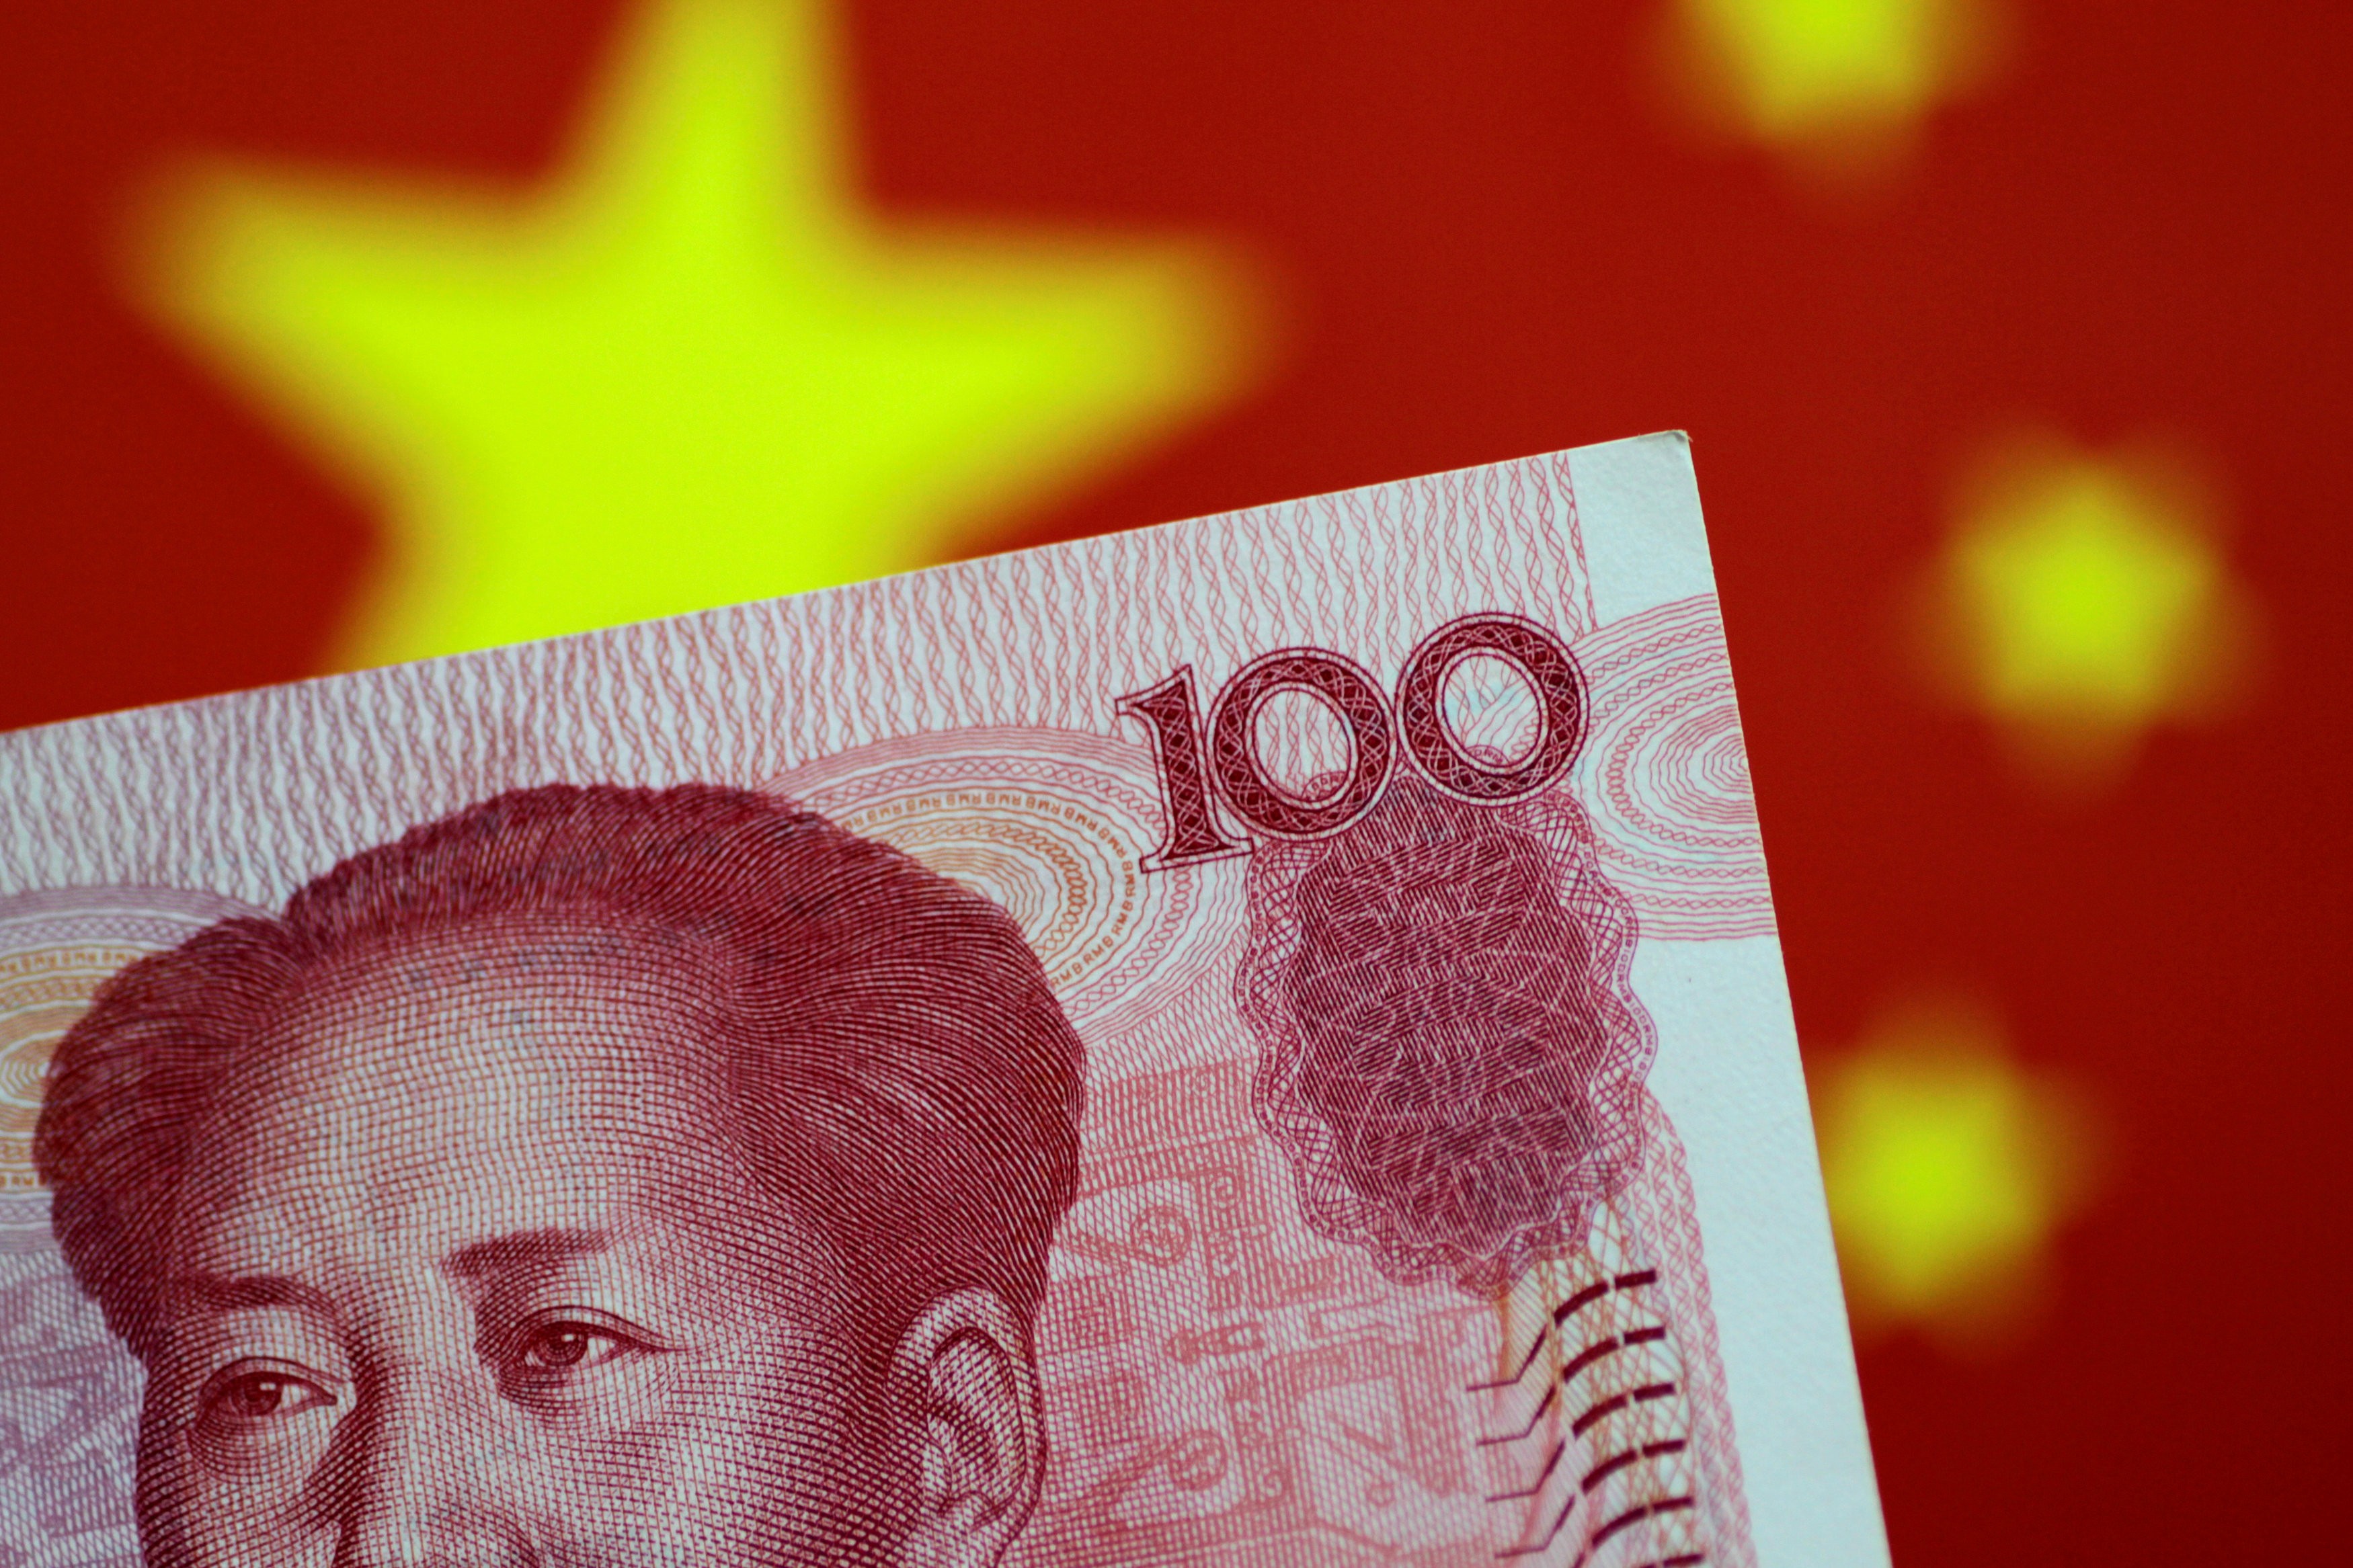 Over the past four decades, China’s typical response to any headache in the economy has been to throw fiat money at it. And so far, it has worked. Photo: Reuters